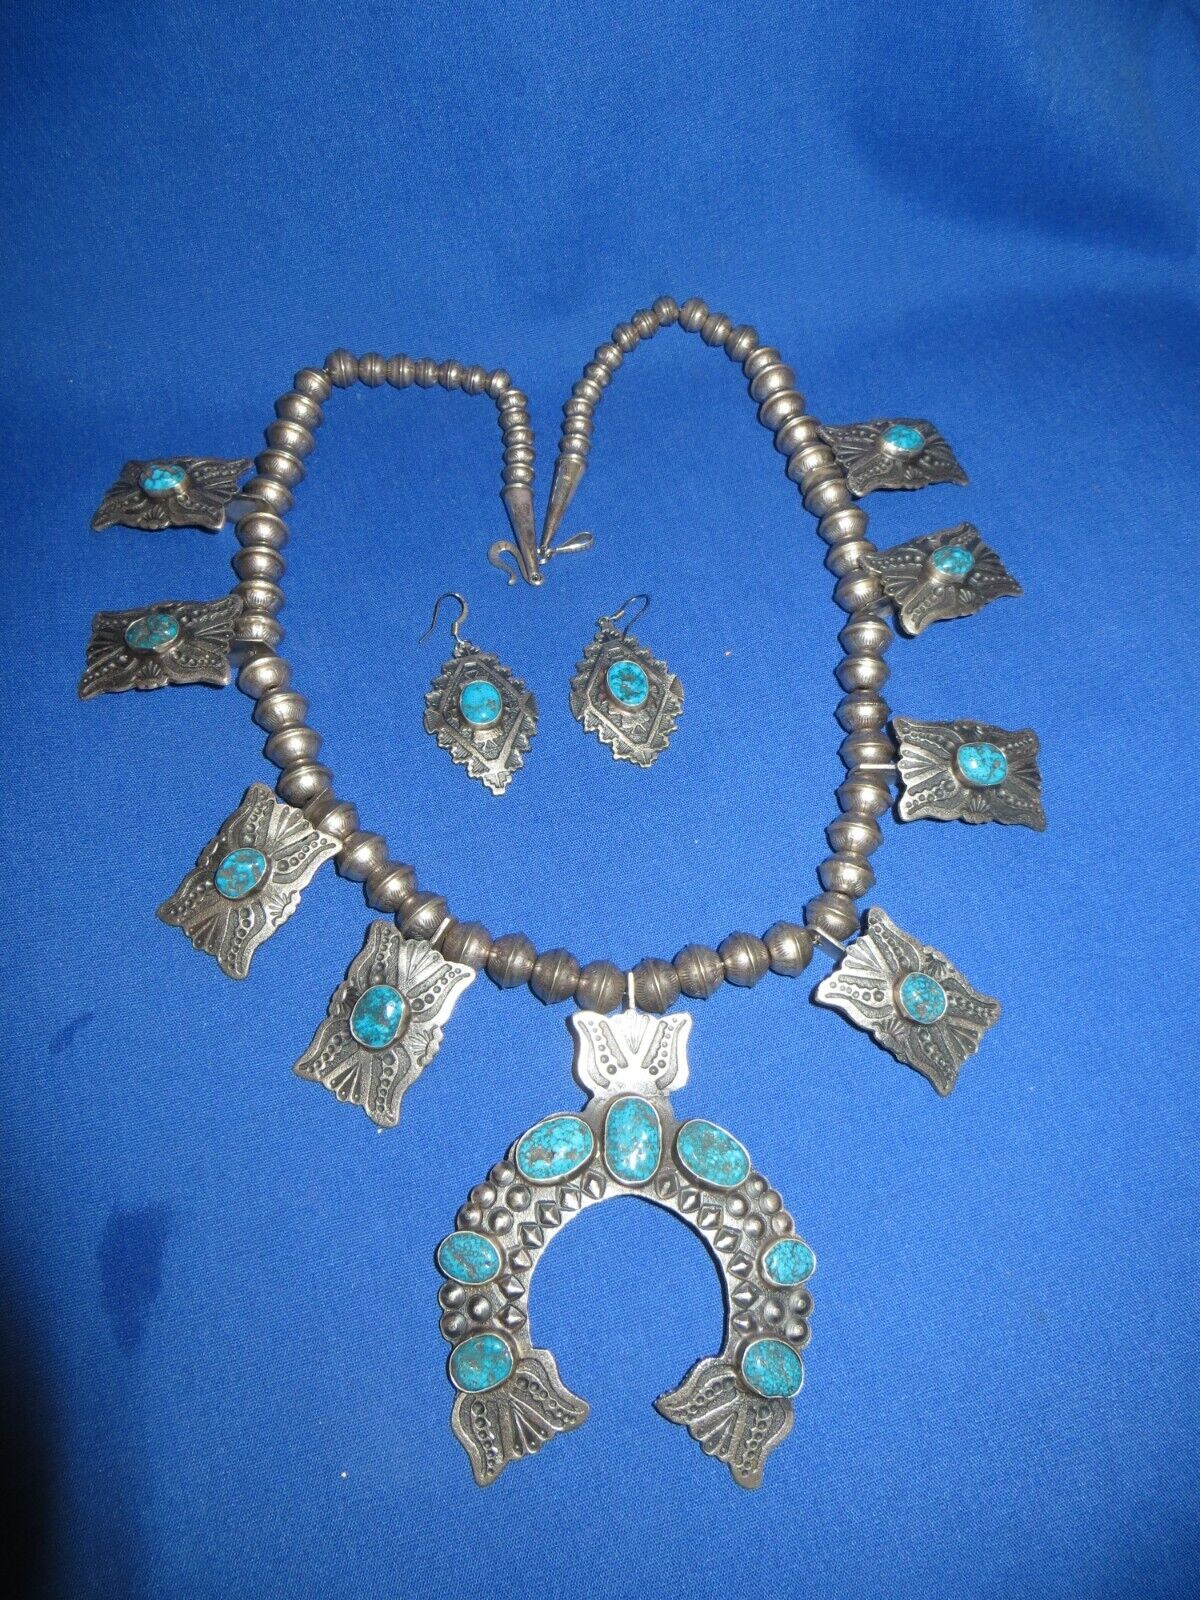 BEST NAVAJO BLUE TURQUOISE STERLING SQUASH BLOSSOM NECKLACE MATCHING EARRINGS